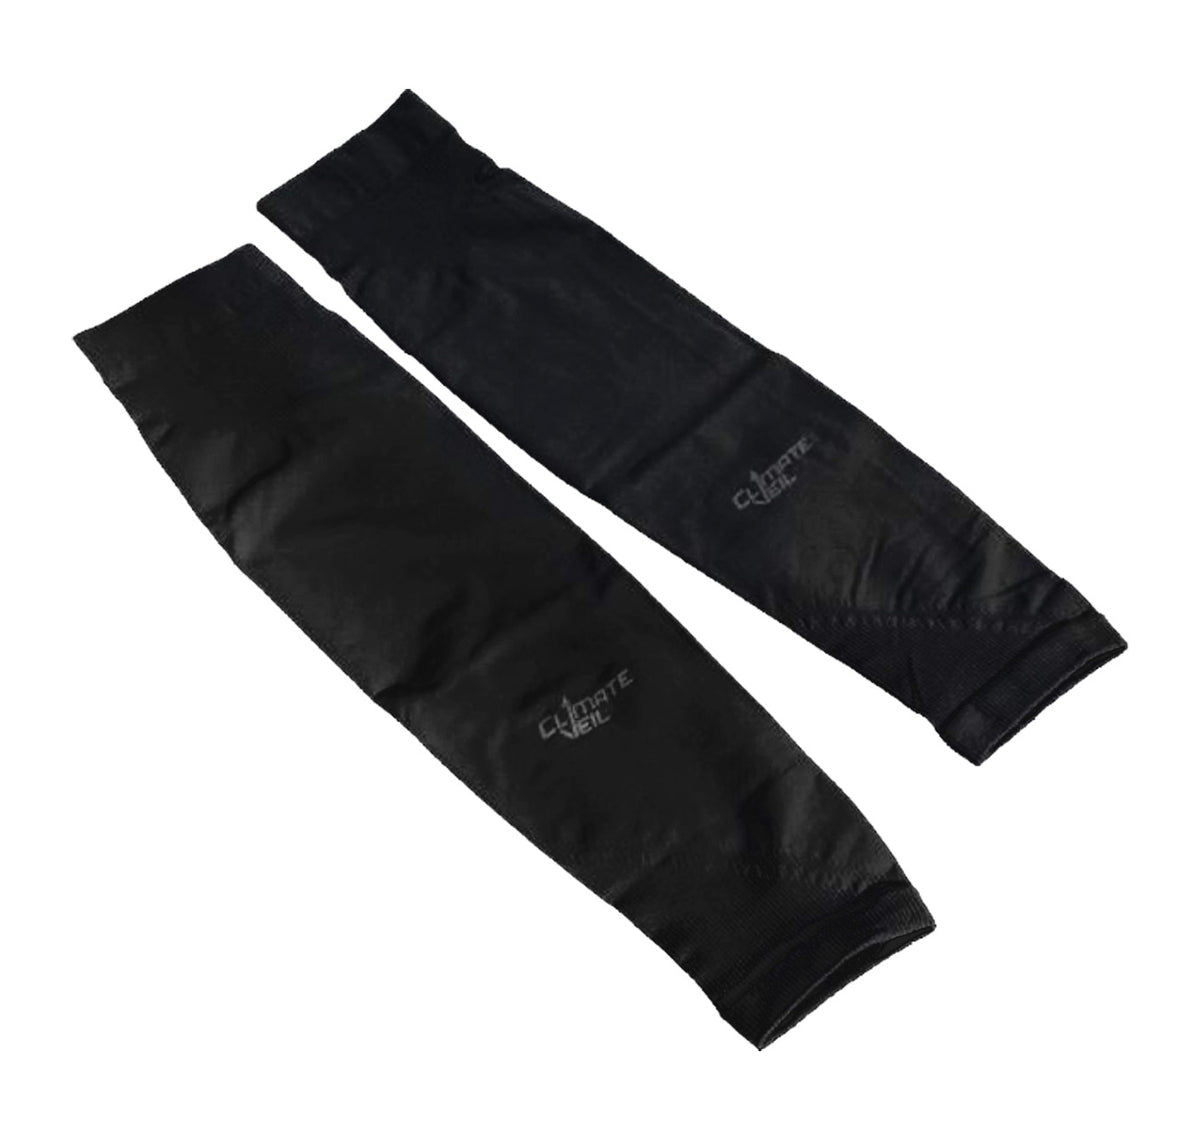 Climate Veil Cooling Arm Sleeves